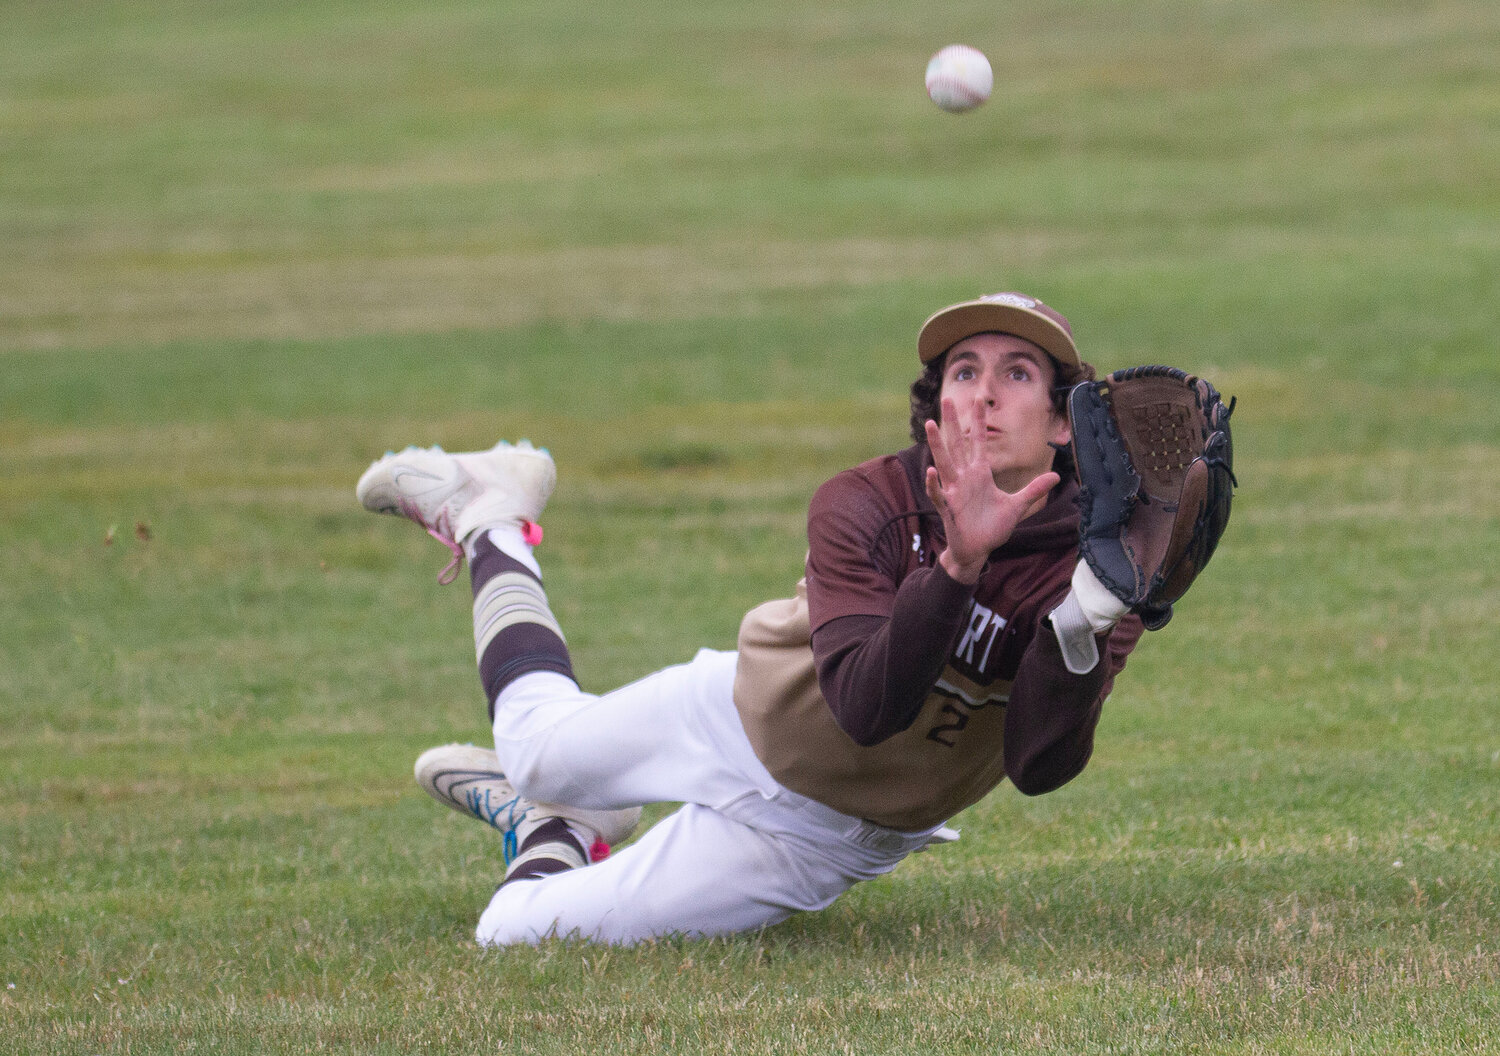 Ben Boudria dives to catch a flyball in right field. But the ball pops free when he crashes to the ground. Boudria played excellent defense making three catches in right field. he also scored the Wildcats game tying run in the seventh inning to even the score at 2-2.